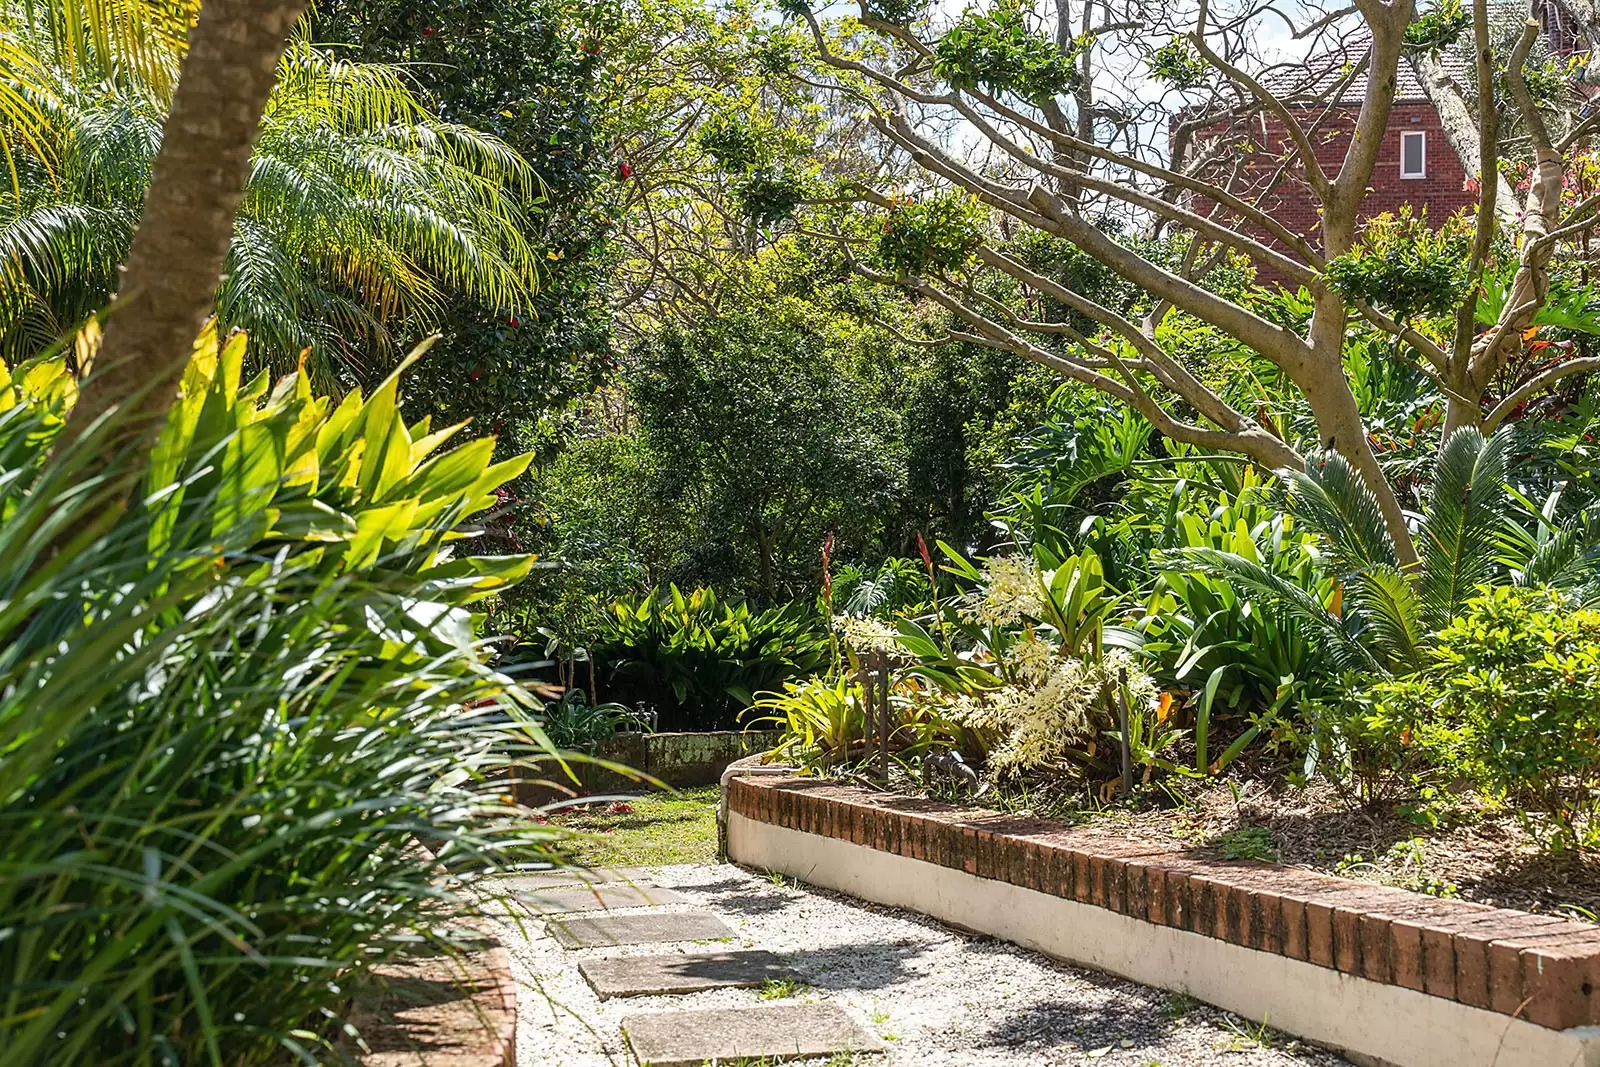 Photo #21: 59/11 Yarranabbe Road, Darling Point - Sold by Sydney Sotheby's International Realty